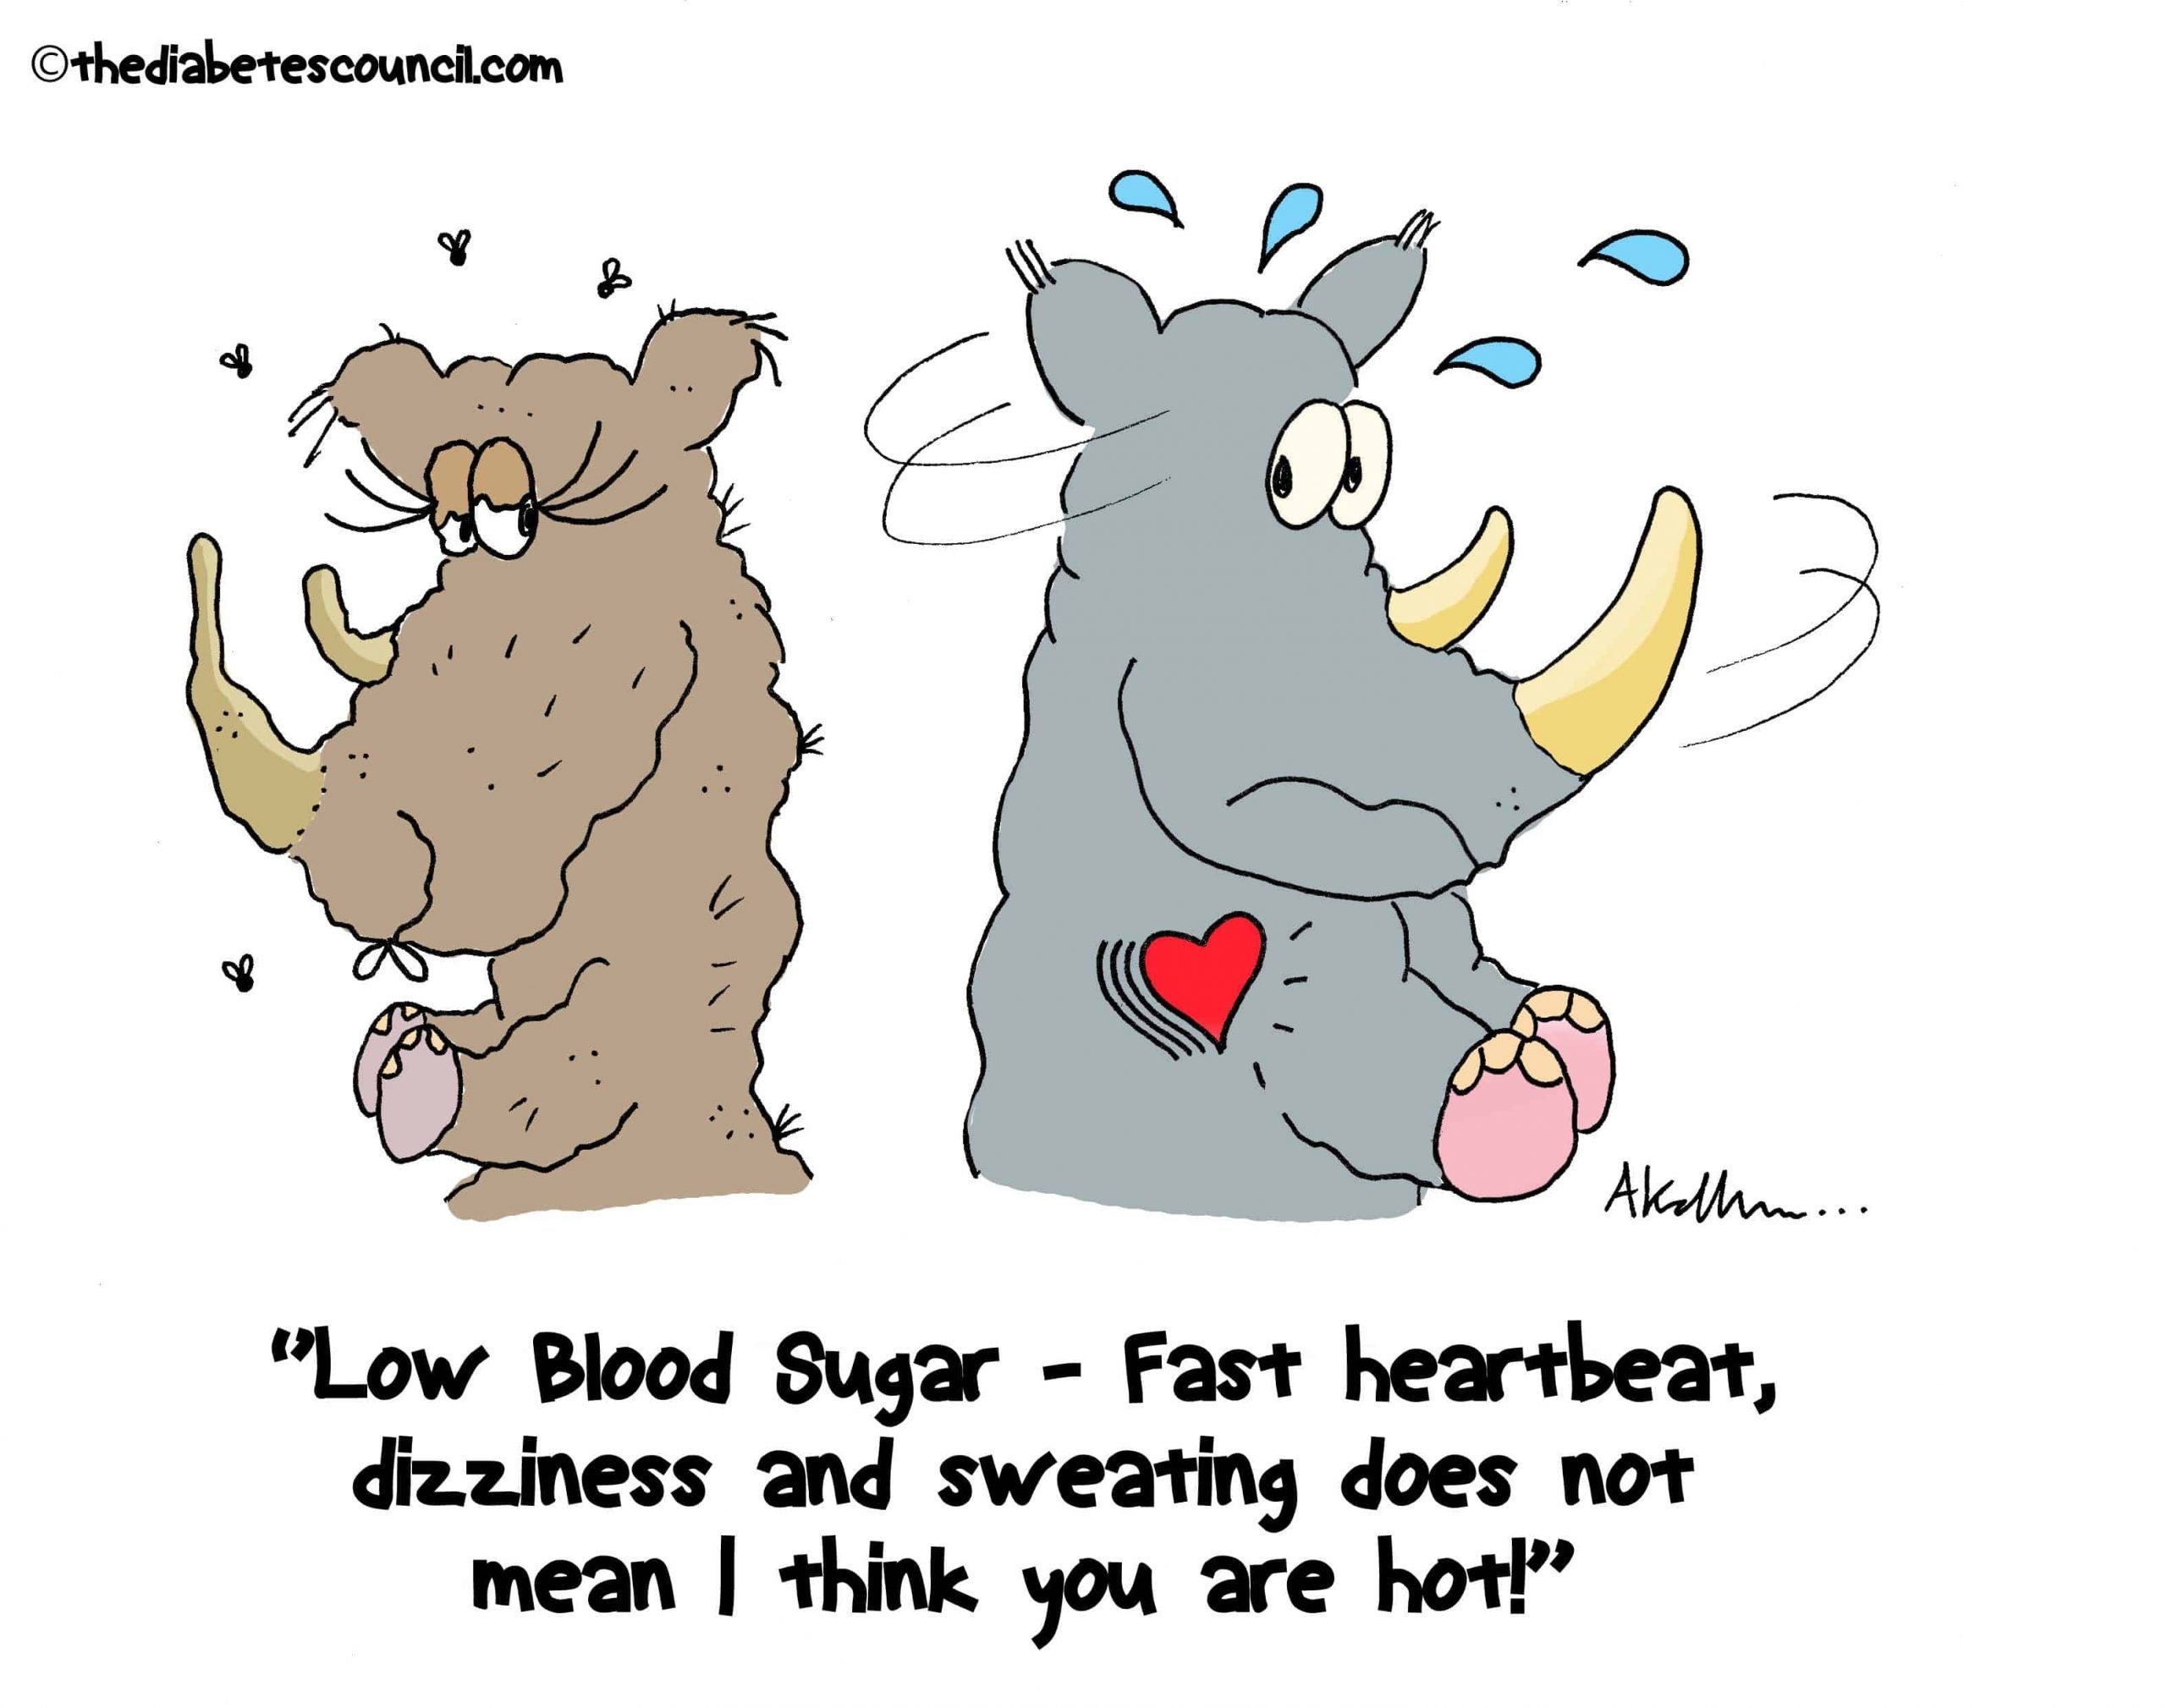 signs and symptoms of low blood sugar